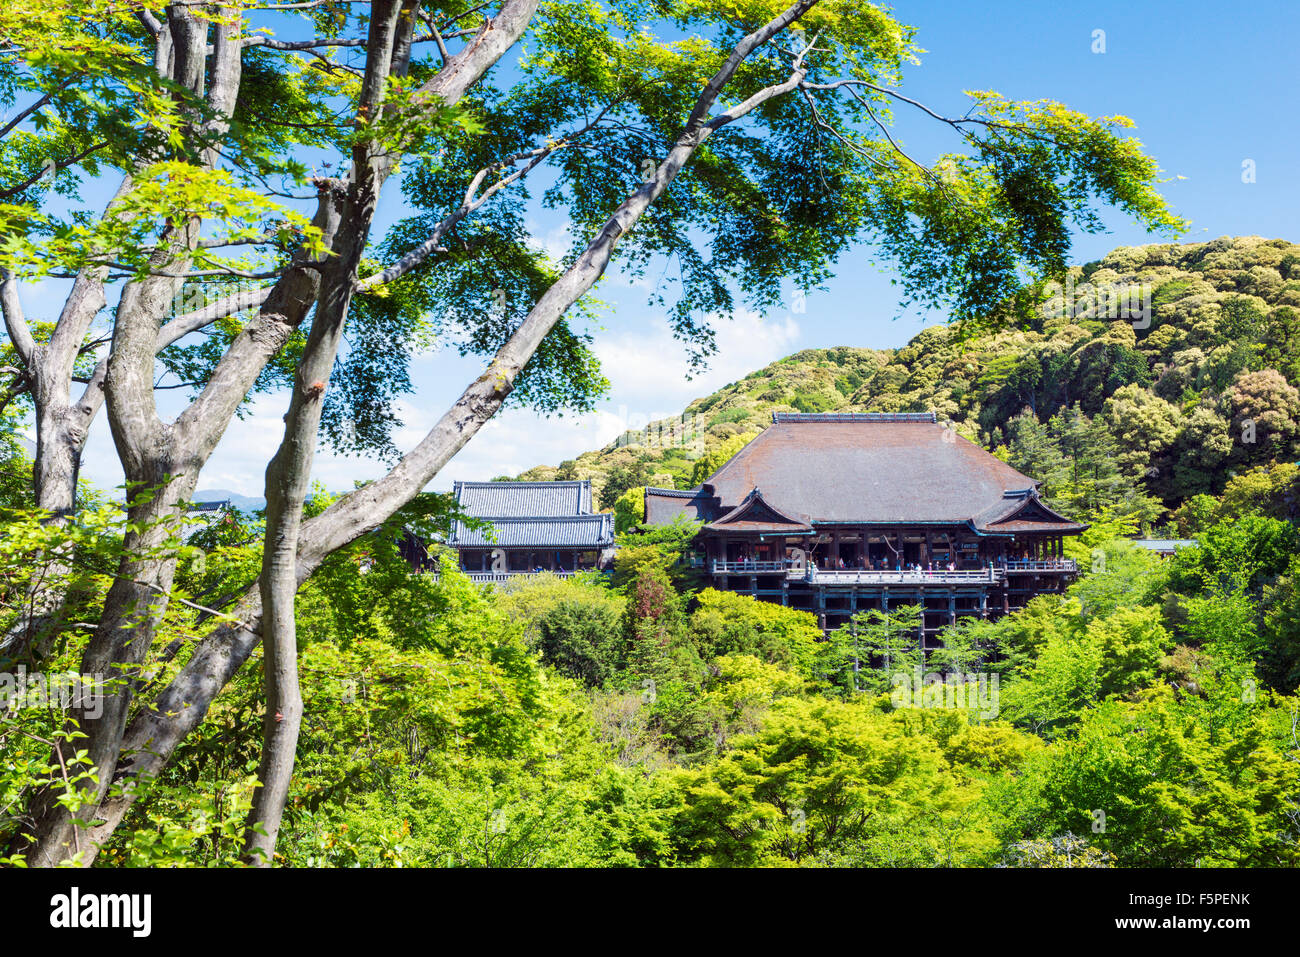 Kiyomizu-dera Temple surrounded by lush green vegetation on a clear sunny day in spring Stock Photo